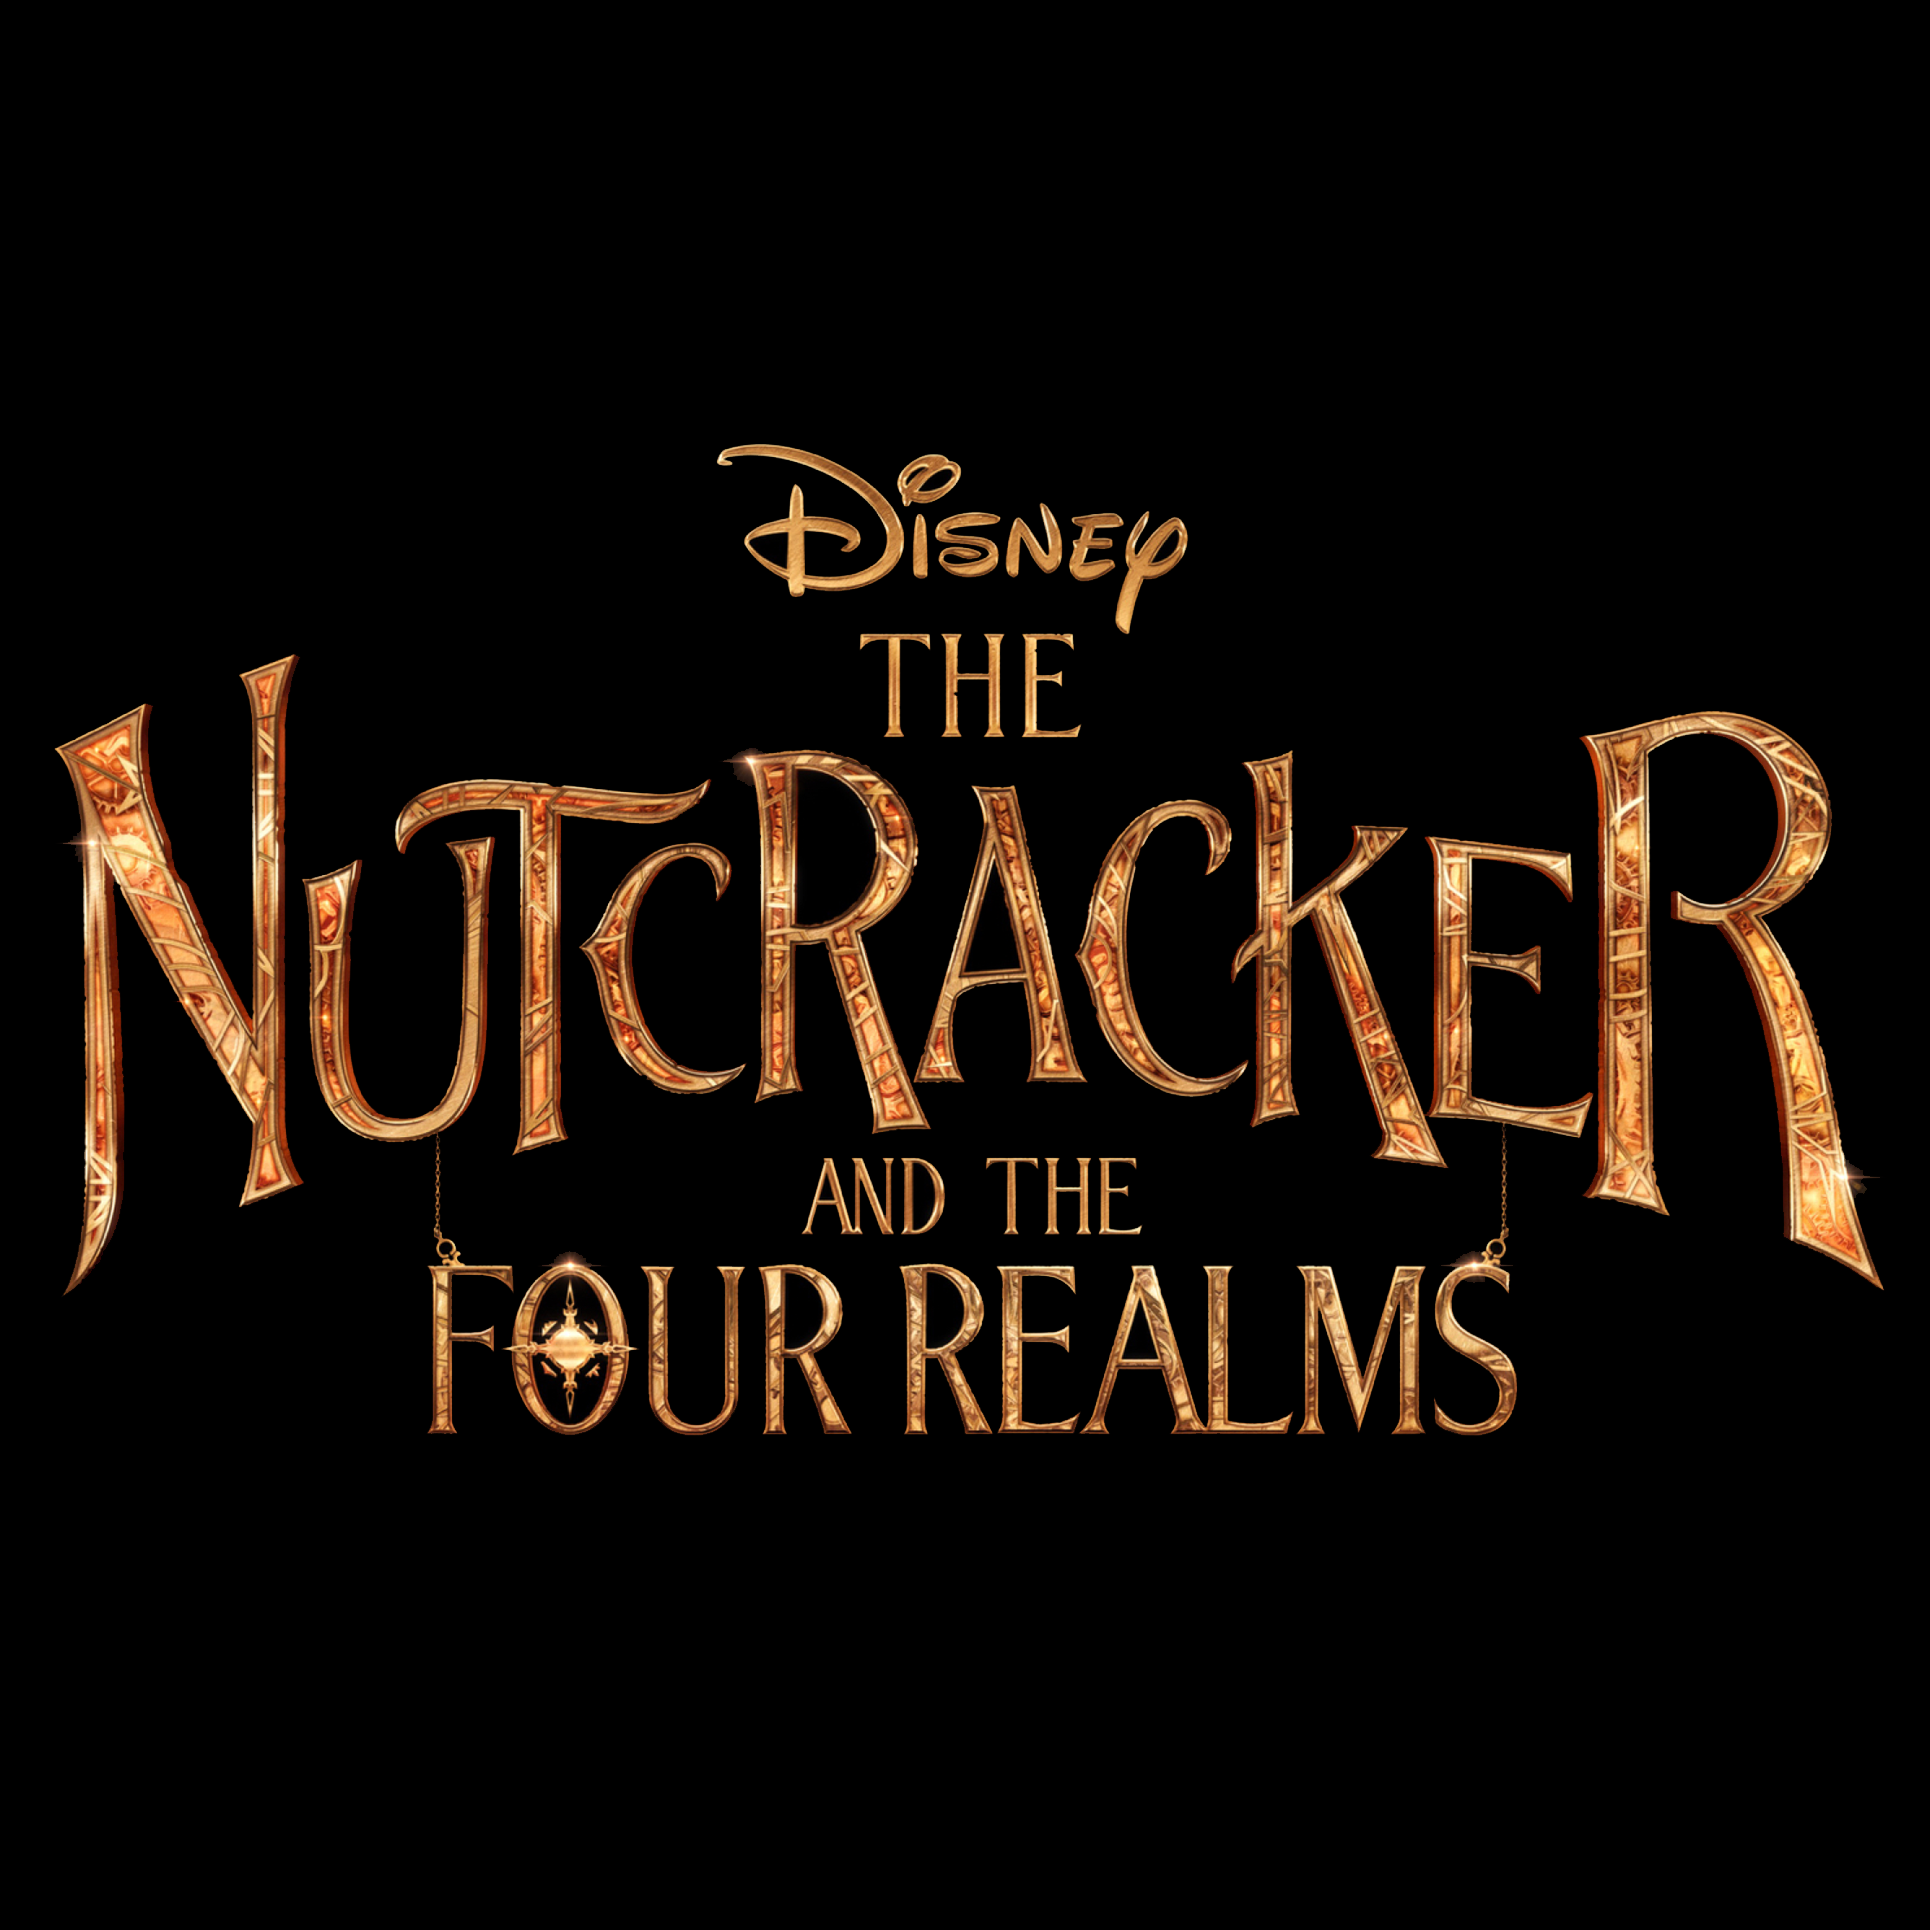 Disney's "The Nutcracker and the Four Realms" with The Hit House's contribution